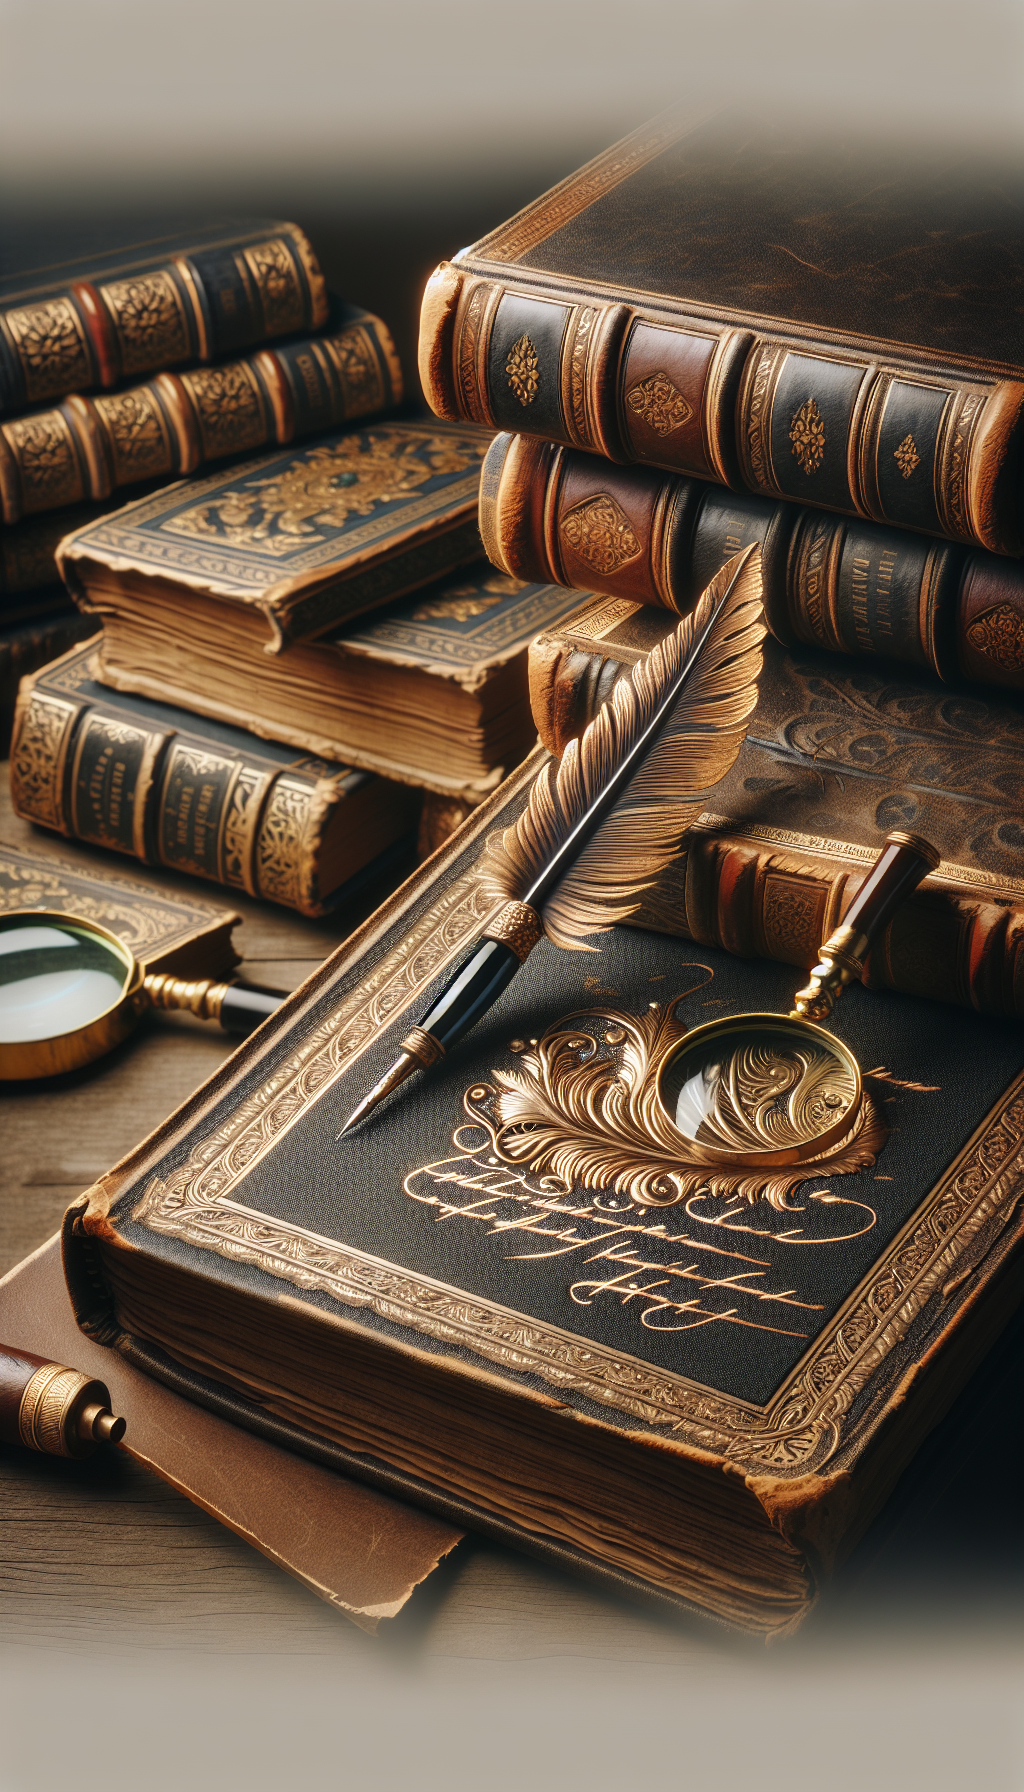 An antique quill pen rests atop an open, weathered leather-bound book, its page embellished with a shimmering, embossed signature. In the background, softly-blurred stacks of venerable tomes ascend, with flickers of gold leaf catching the light. A magnifying glass hovers over the signature, symbolizing scrutiny and the magnified importance—and value—of author autographs on old books.